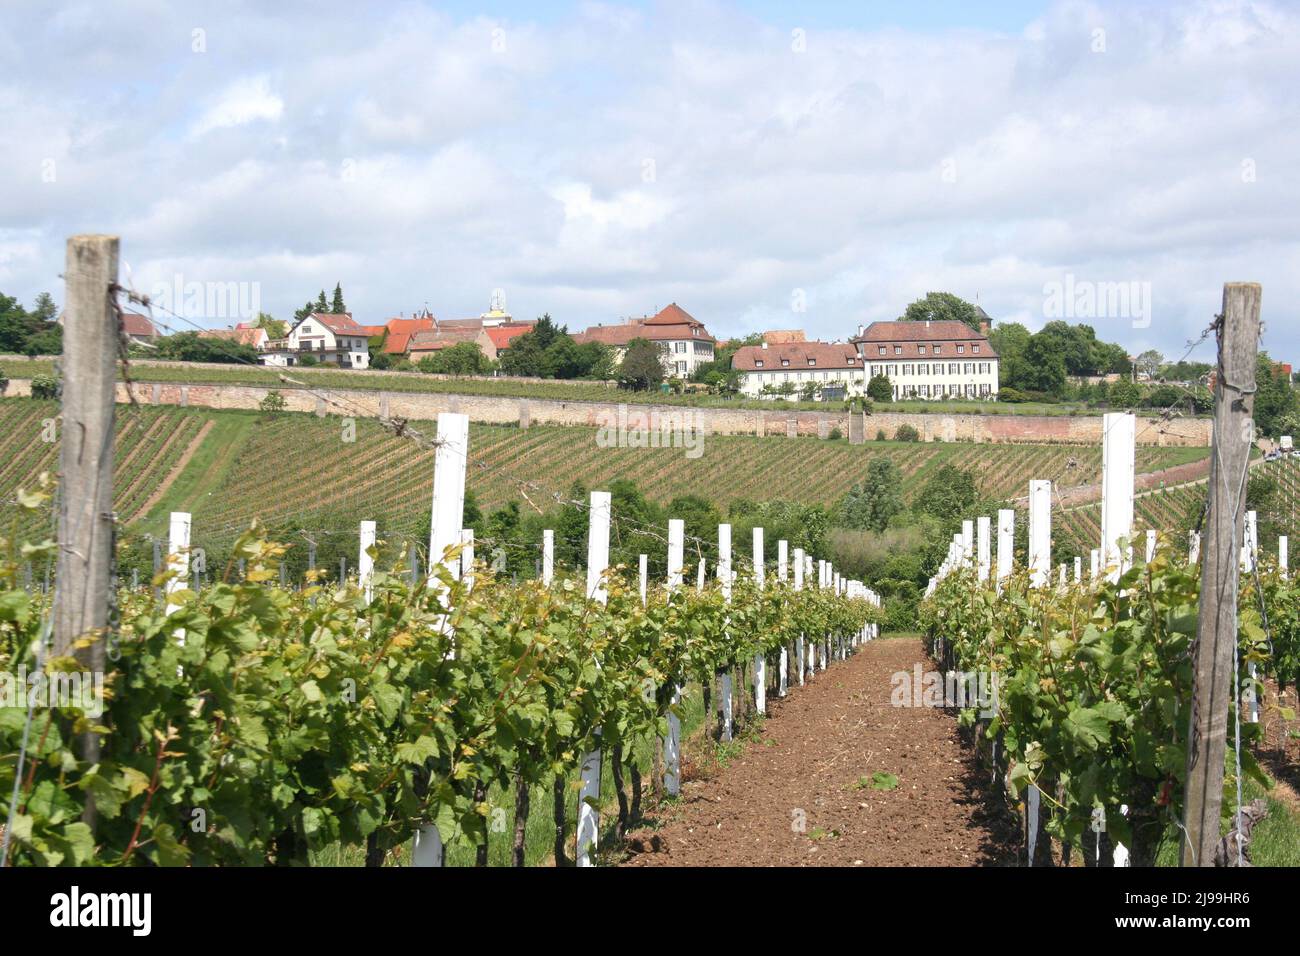 View of the brightly colored roofs of the old town of Herxheim am berg, Germany, from the surrounding vineyards. Stock Photo